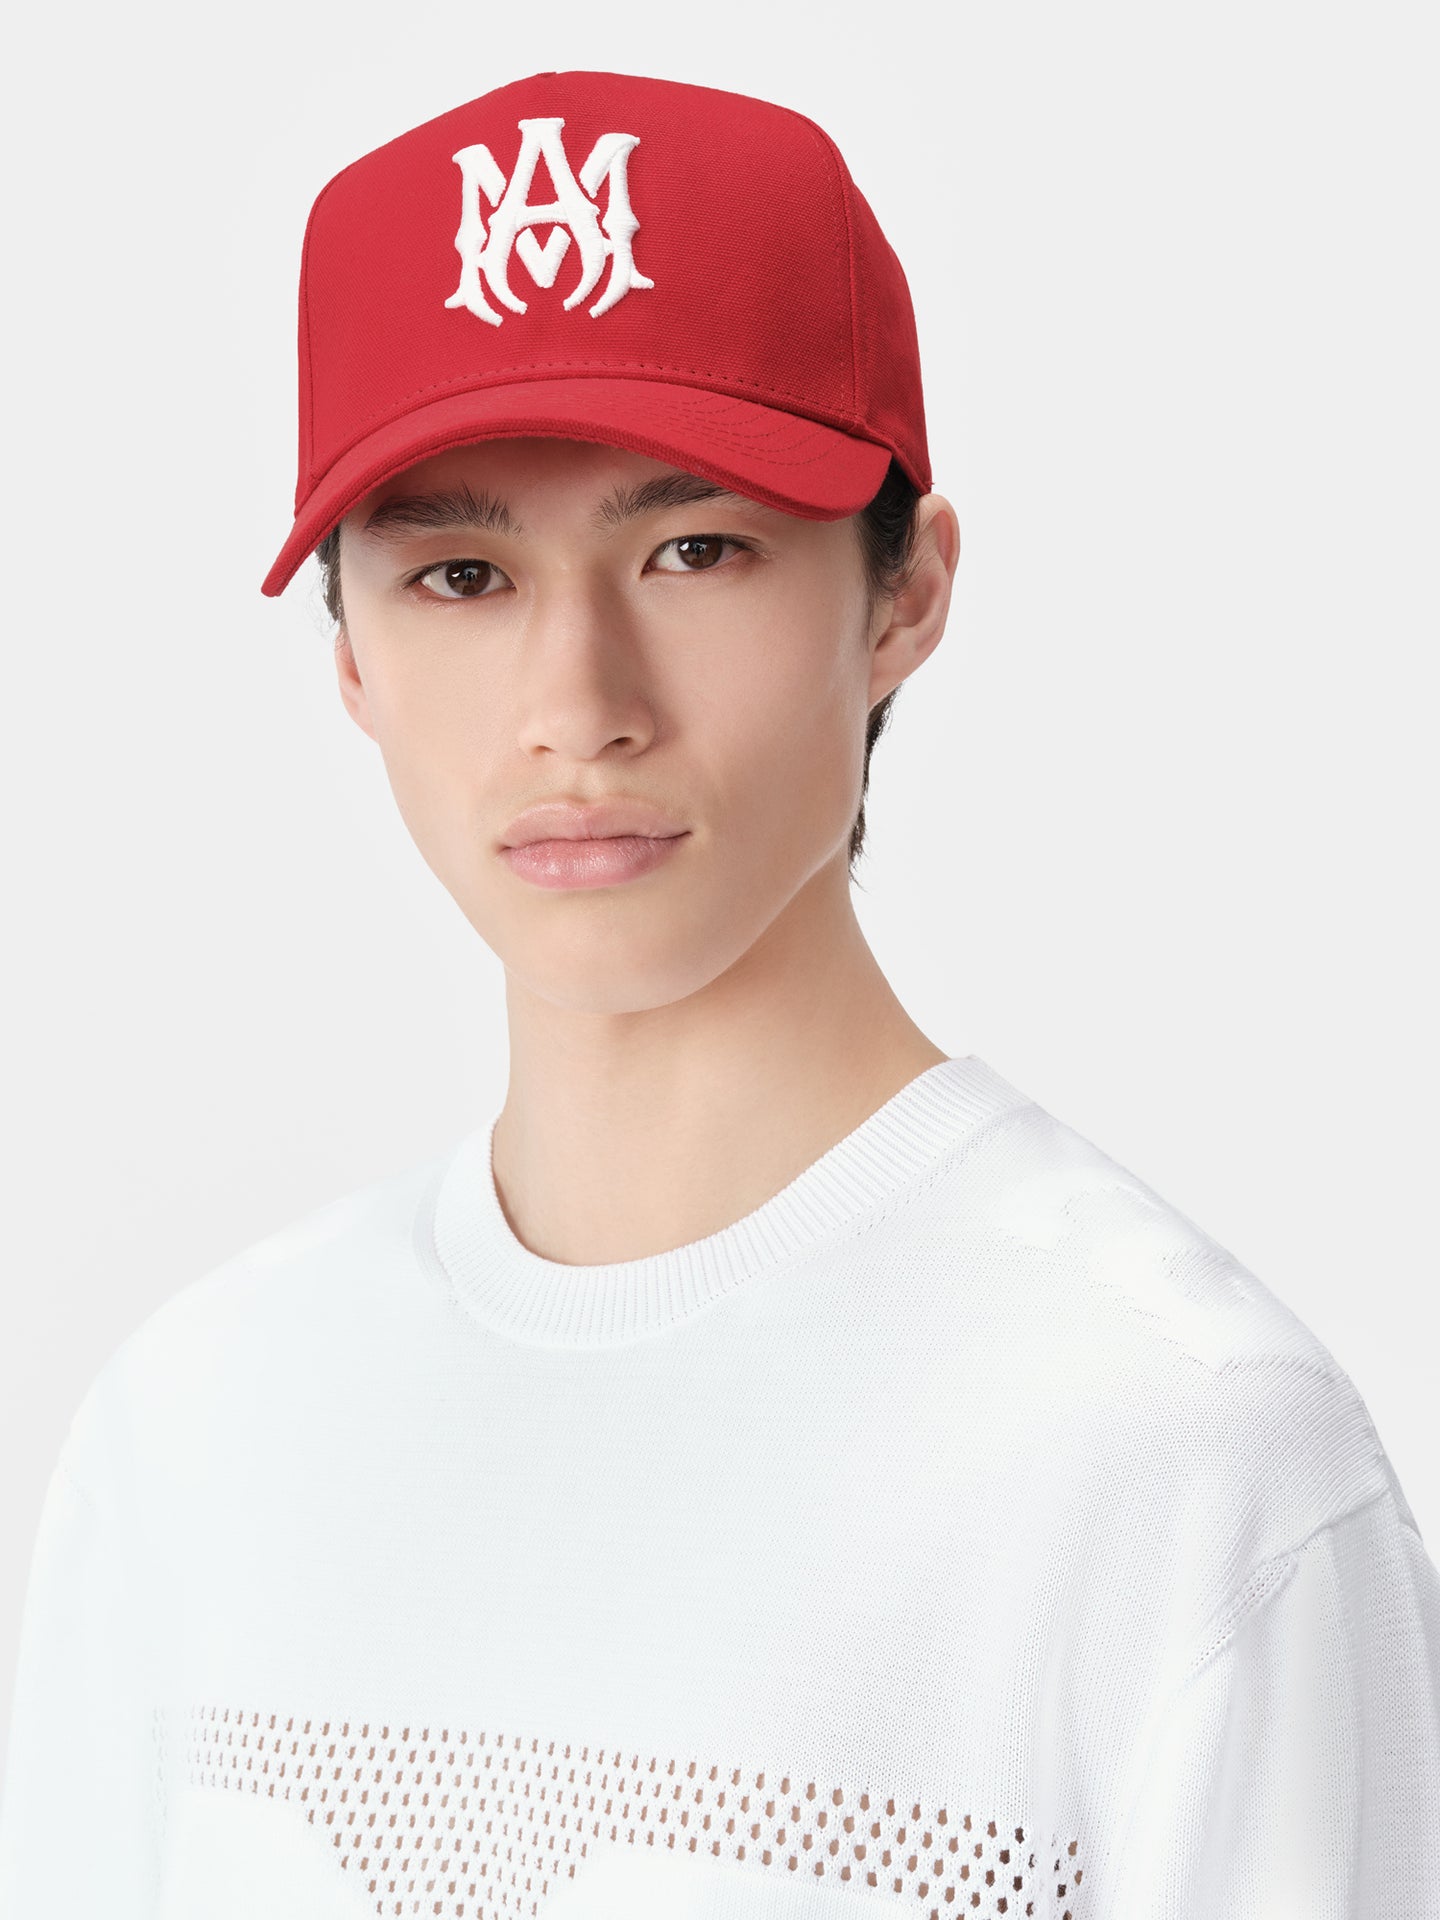 FULL CANVAS MA HAT - Red